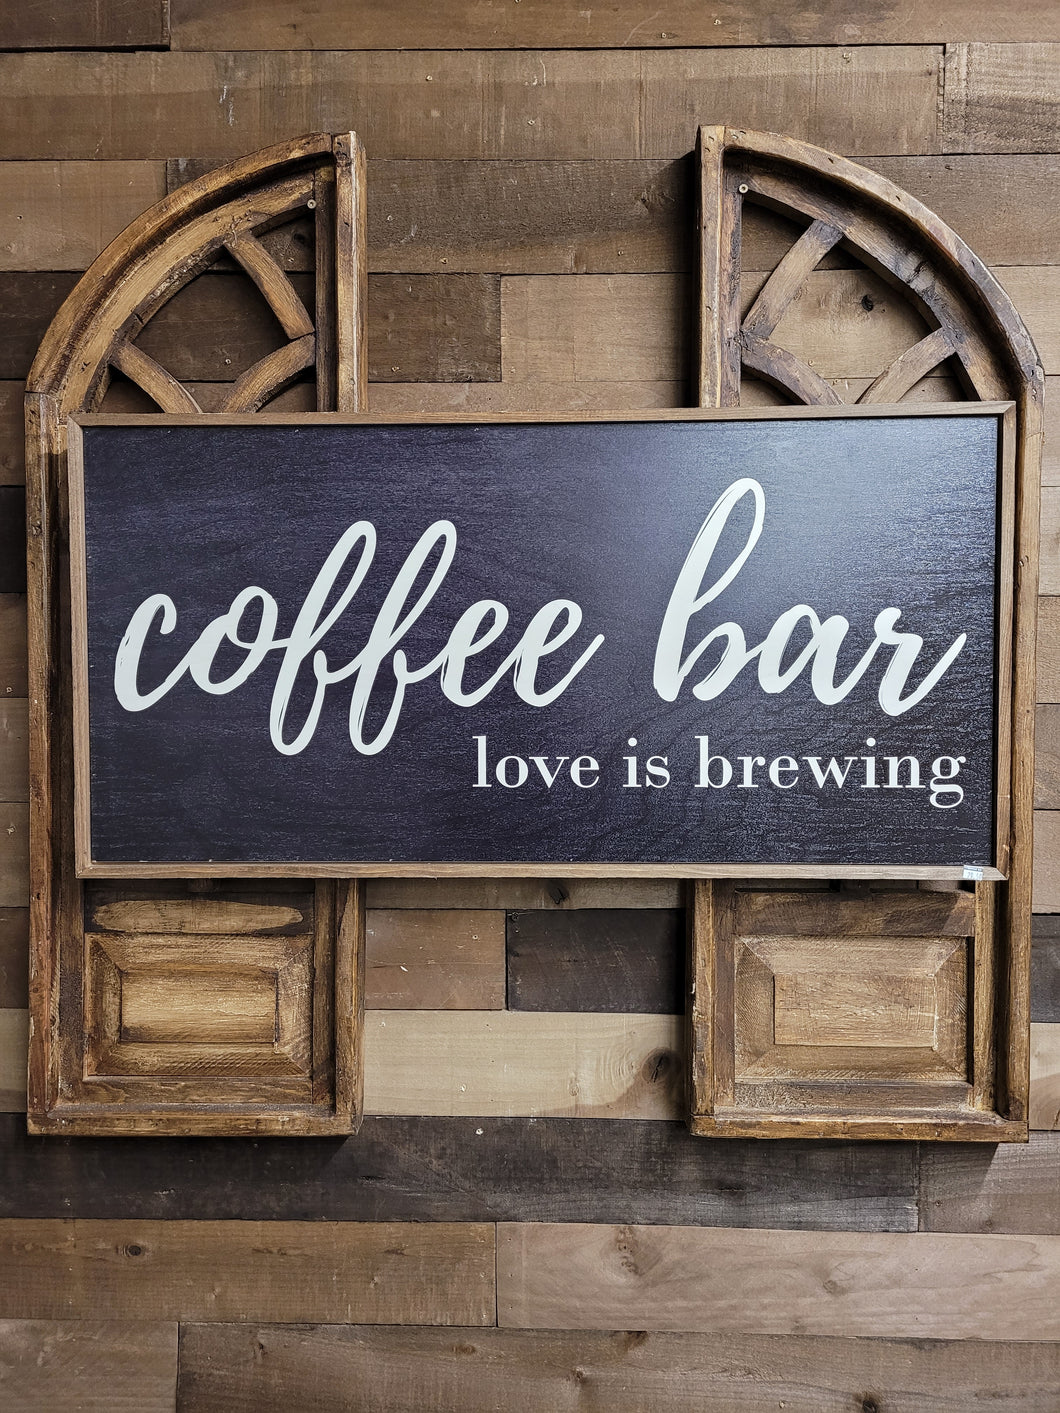 Coffee Bar Love is Brewing SIGN, Coffee Bar SIGN, Gift, PREORDER 